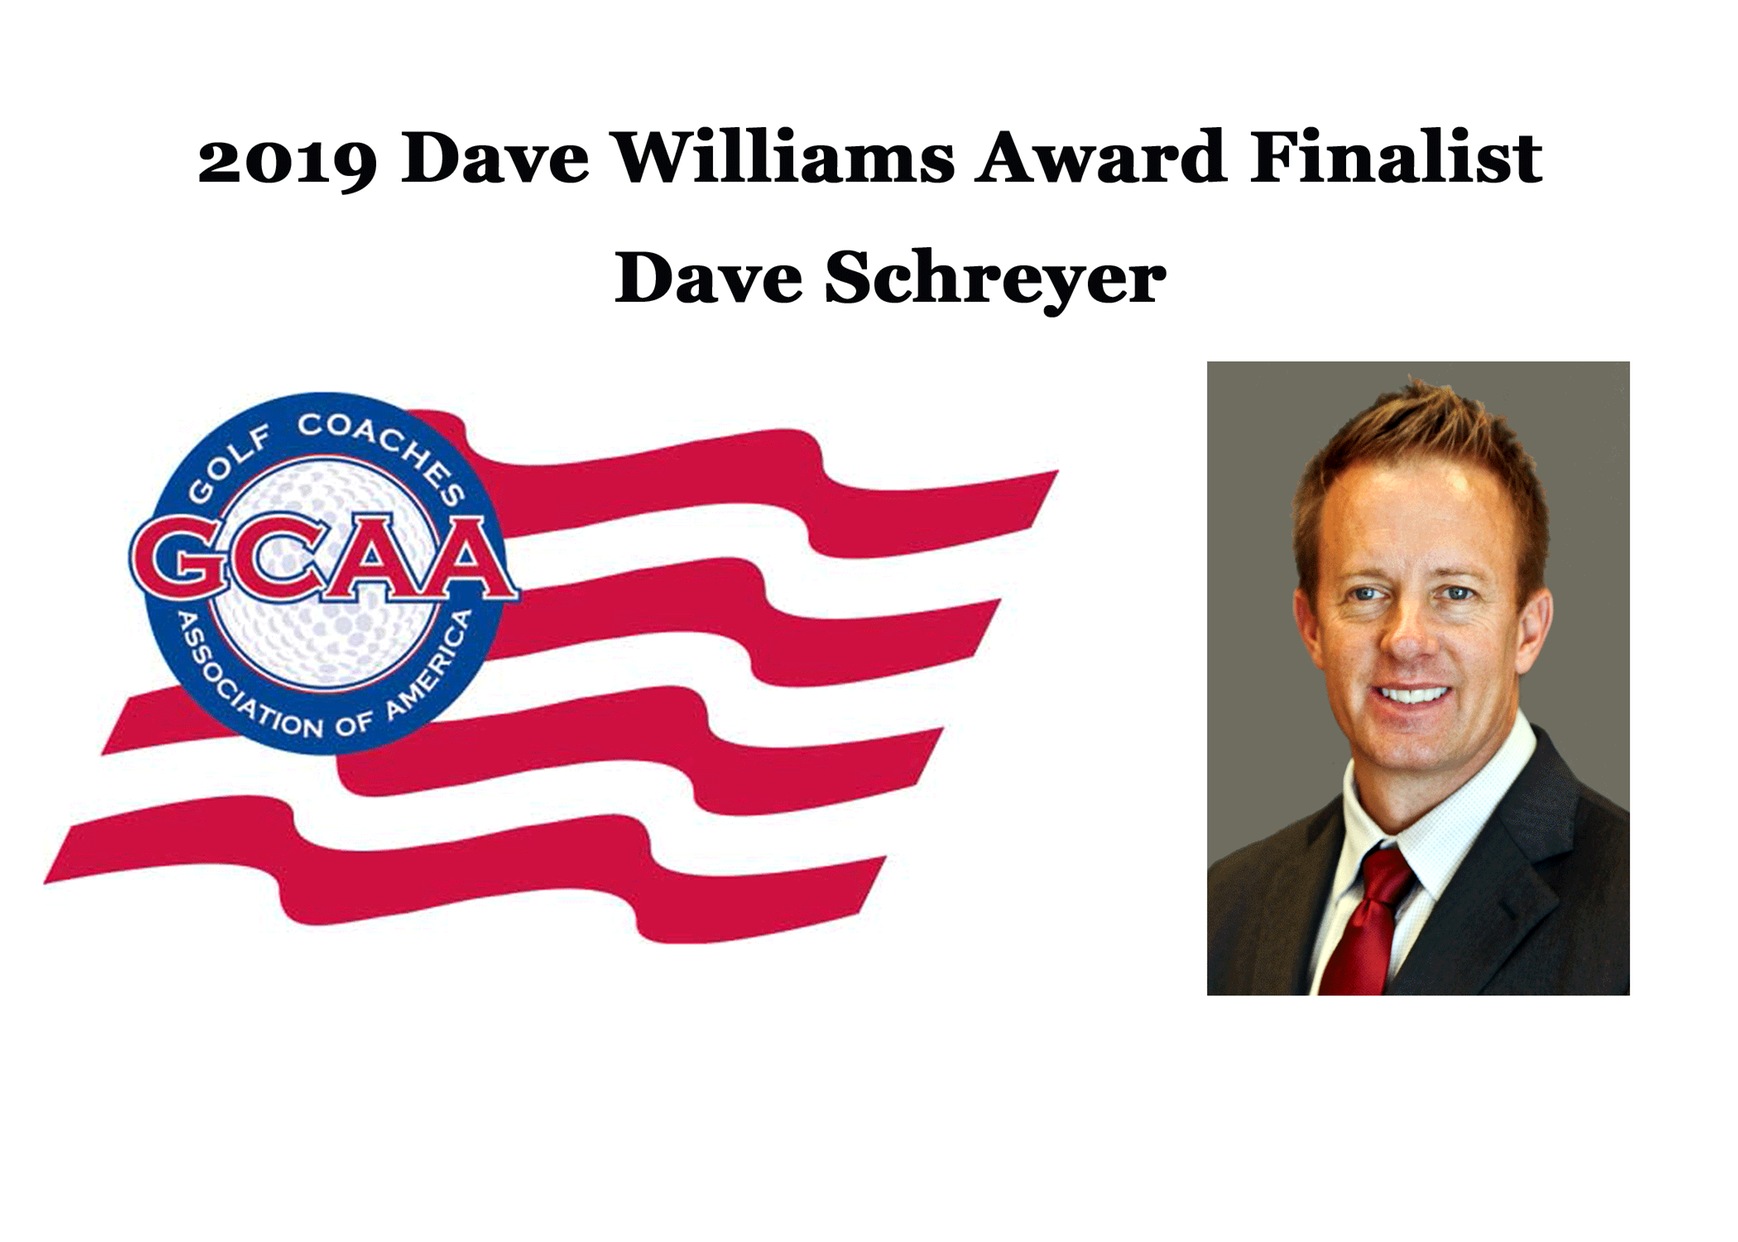 Schreyer among finalists for Dave Williams Award